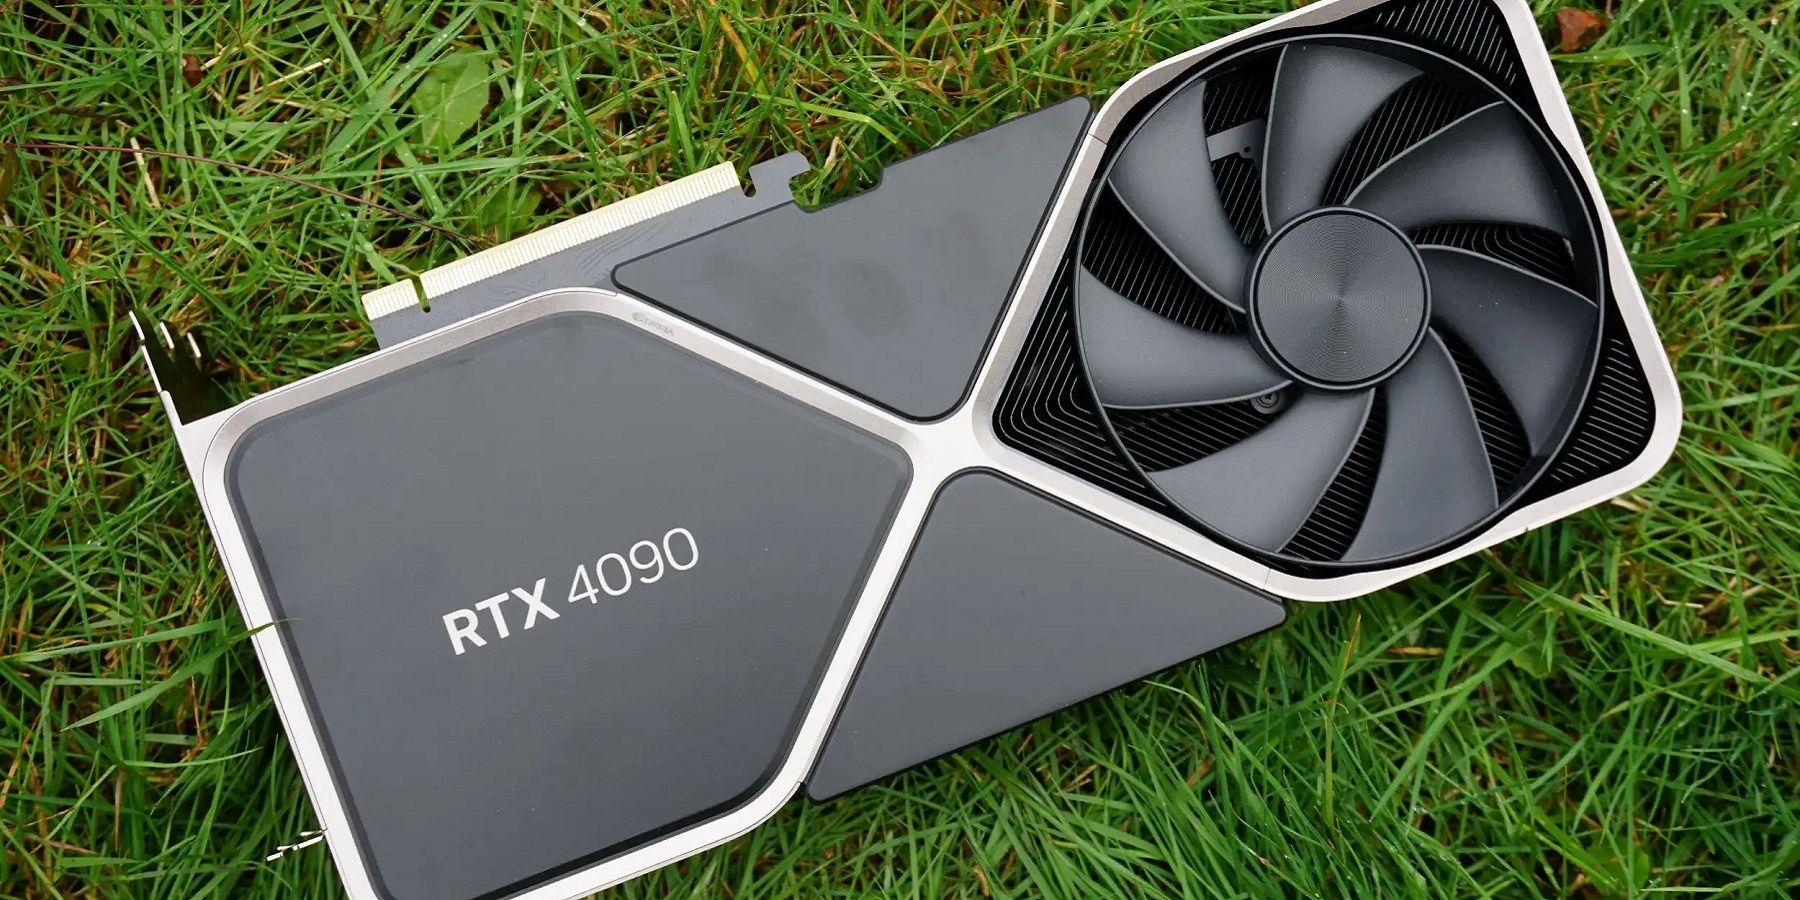 Photo of an Nvidia RTX 4090 graphics card on some grass.